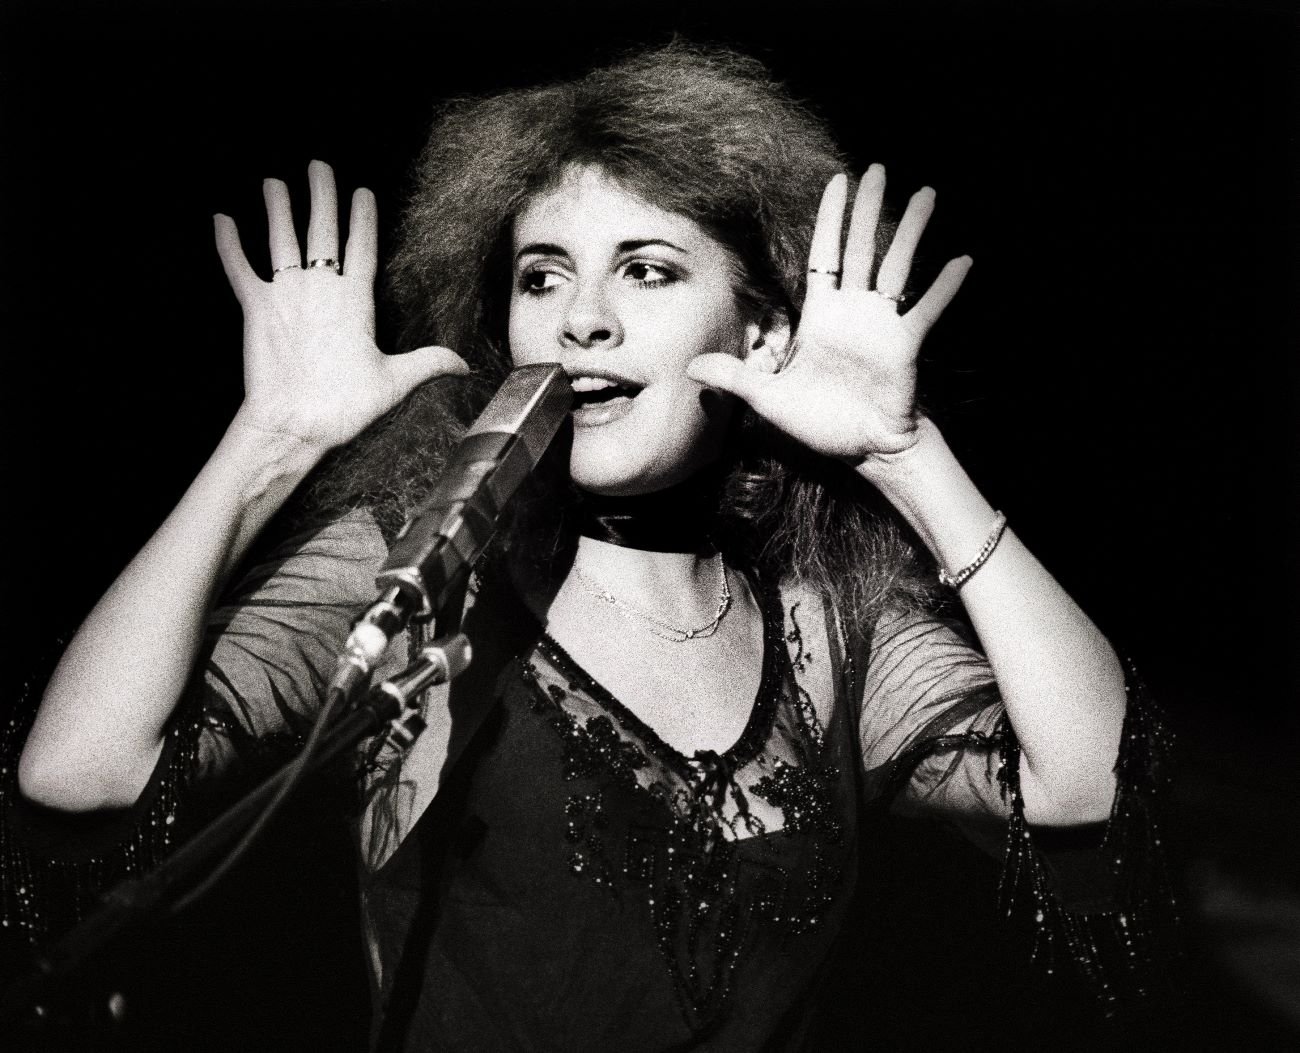 Stevie Nicks sings into a microphone and holds her hands near her face.